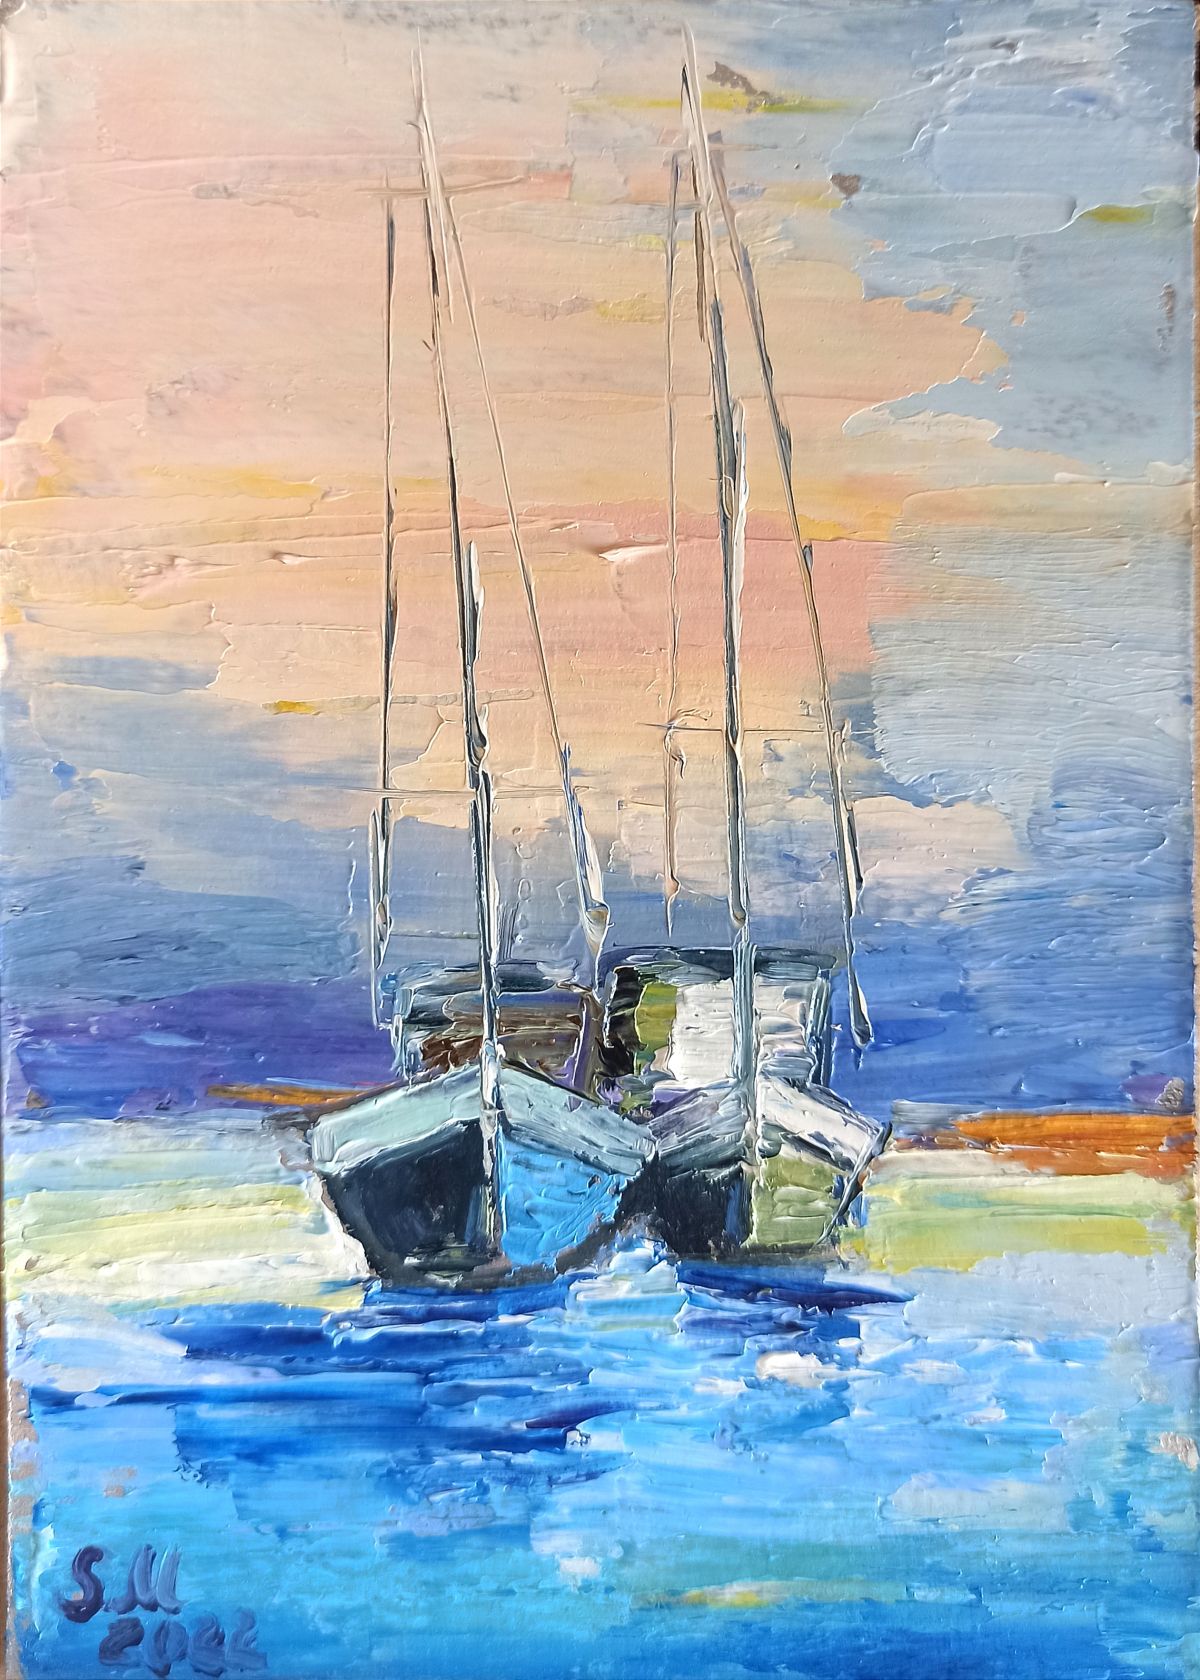 Seascape With Yachts Painting Photo